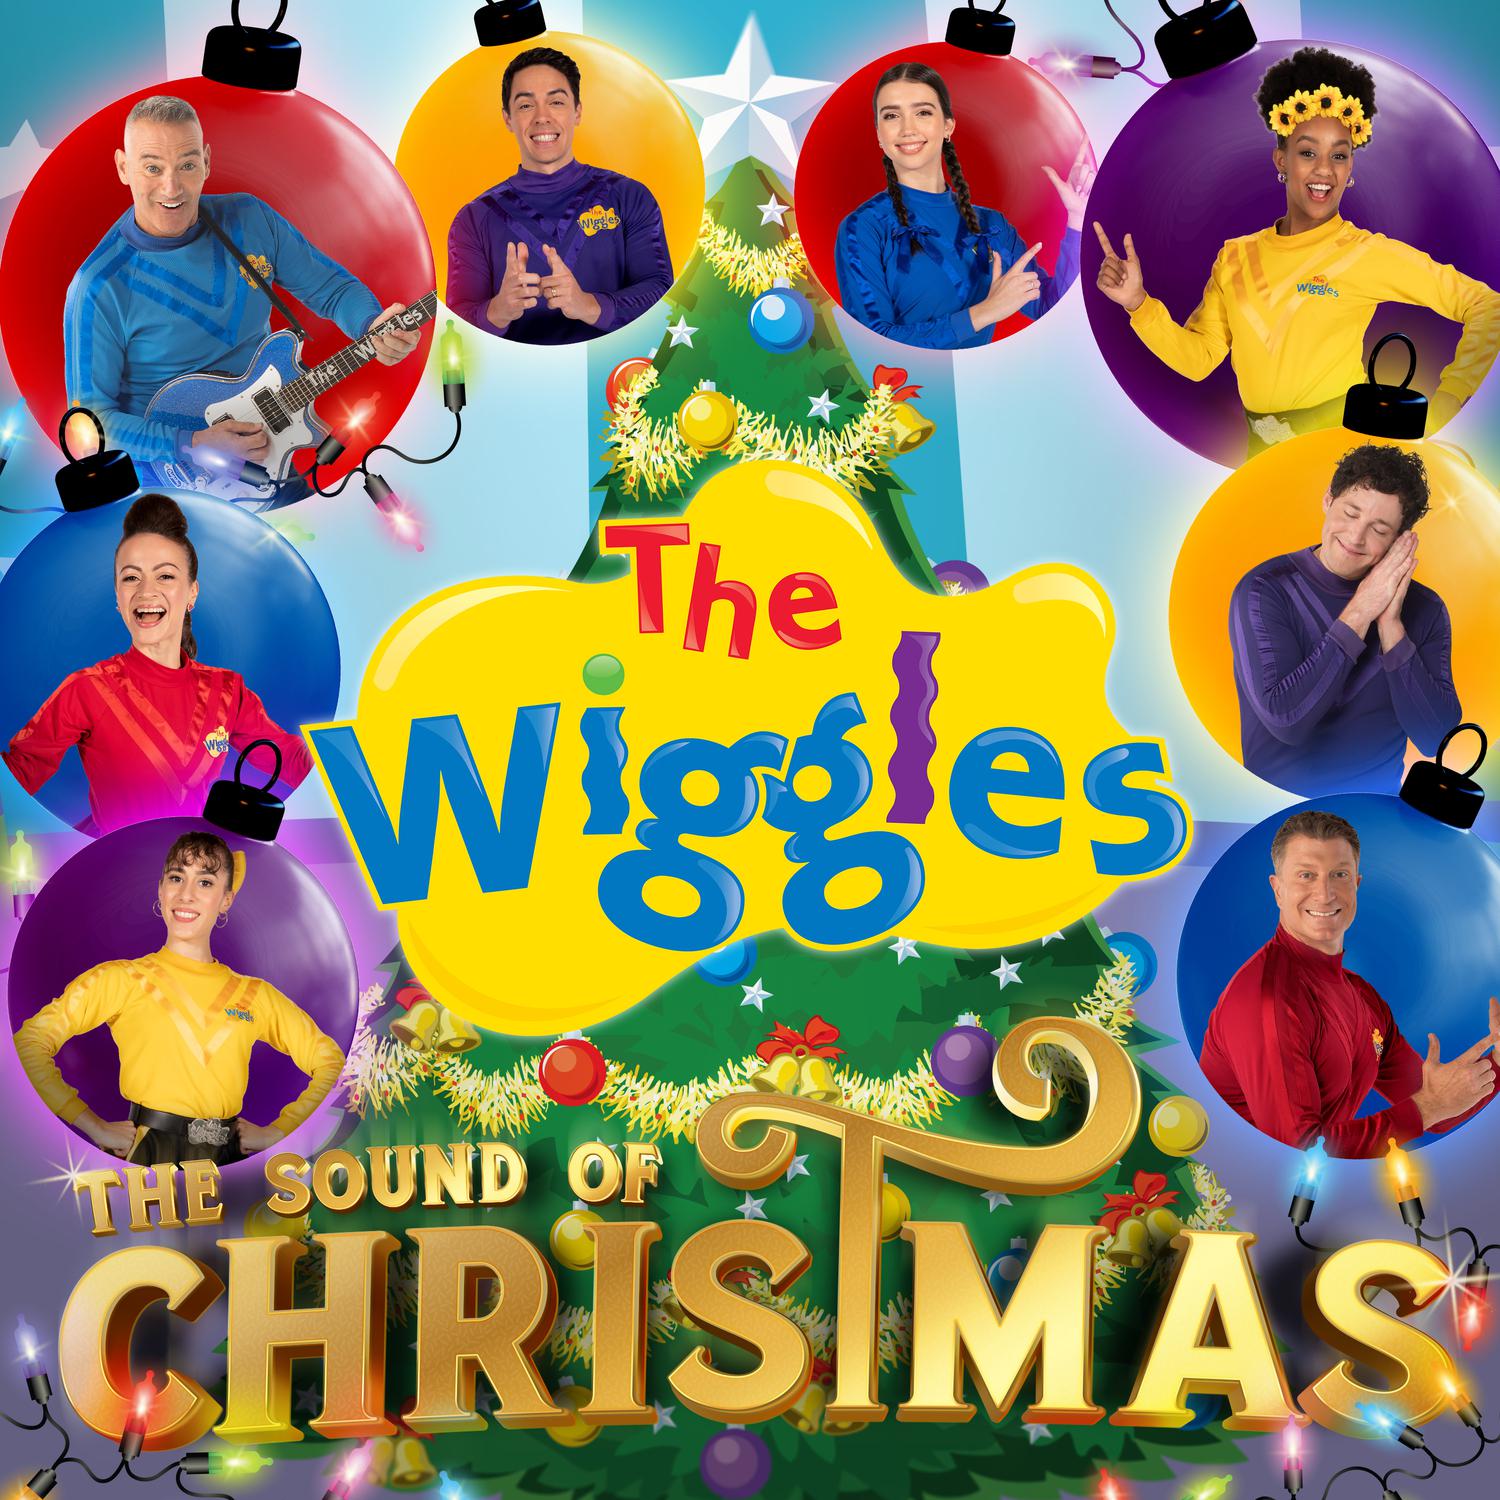 The Wiggles - We Wish You a Merry Christmas